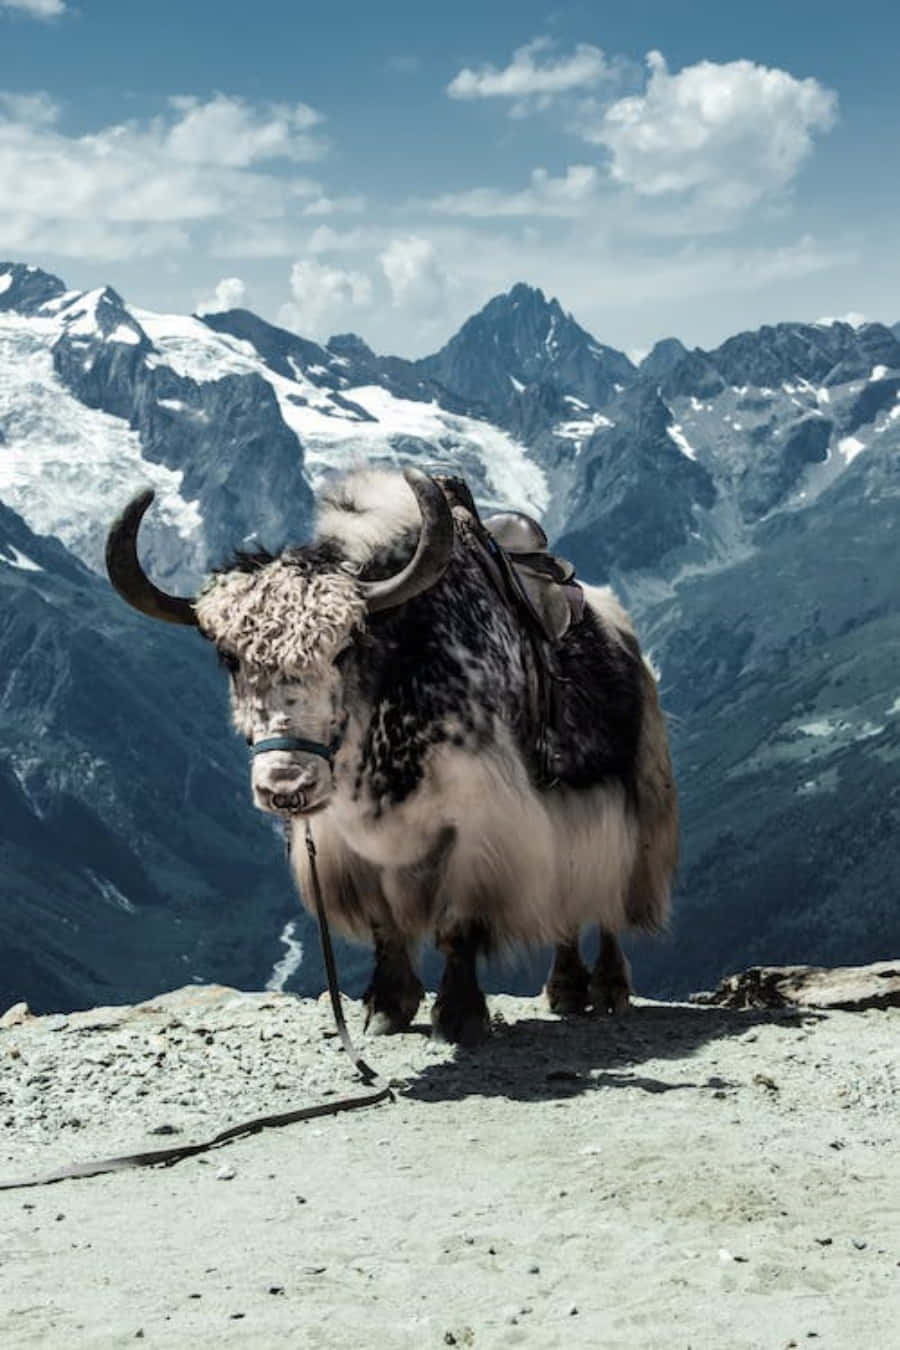 A Yak Standing On A Mountain With Mountains In The Background